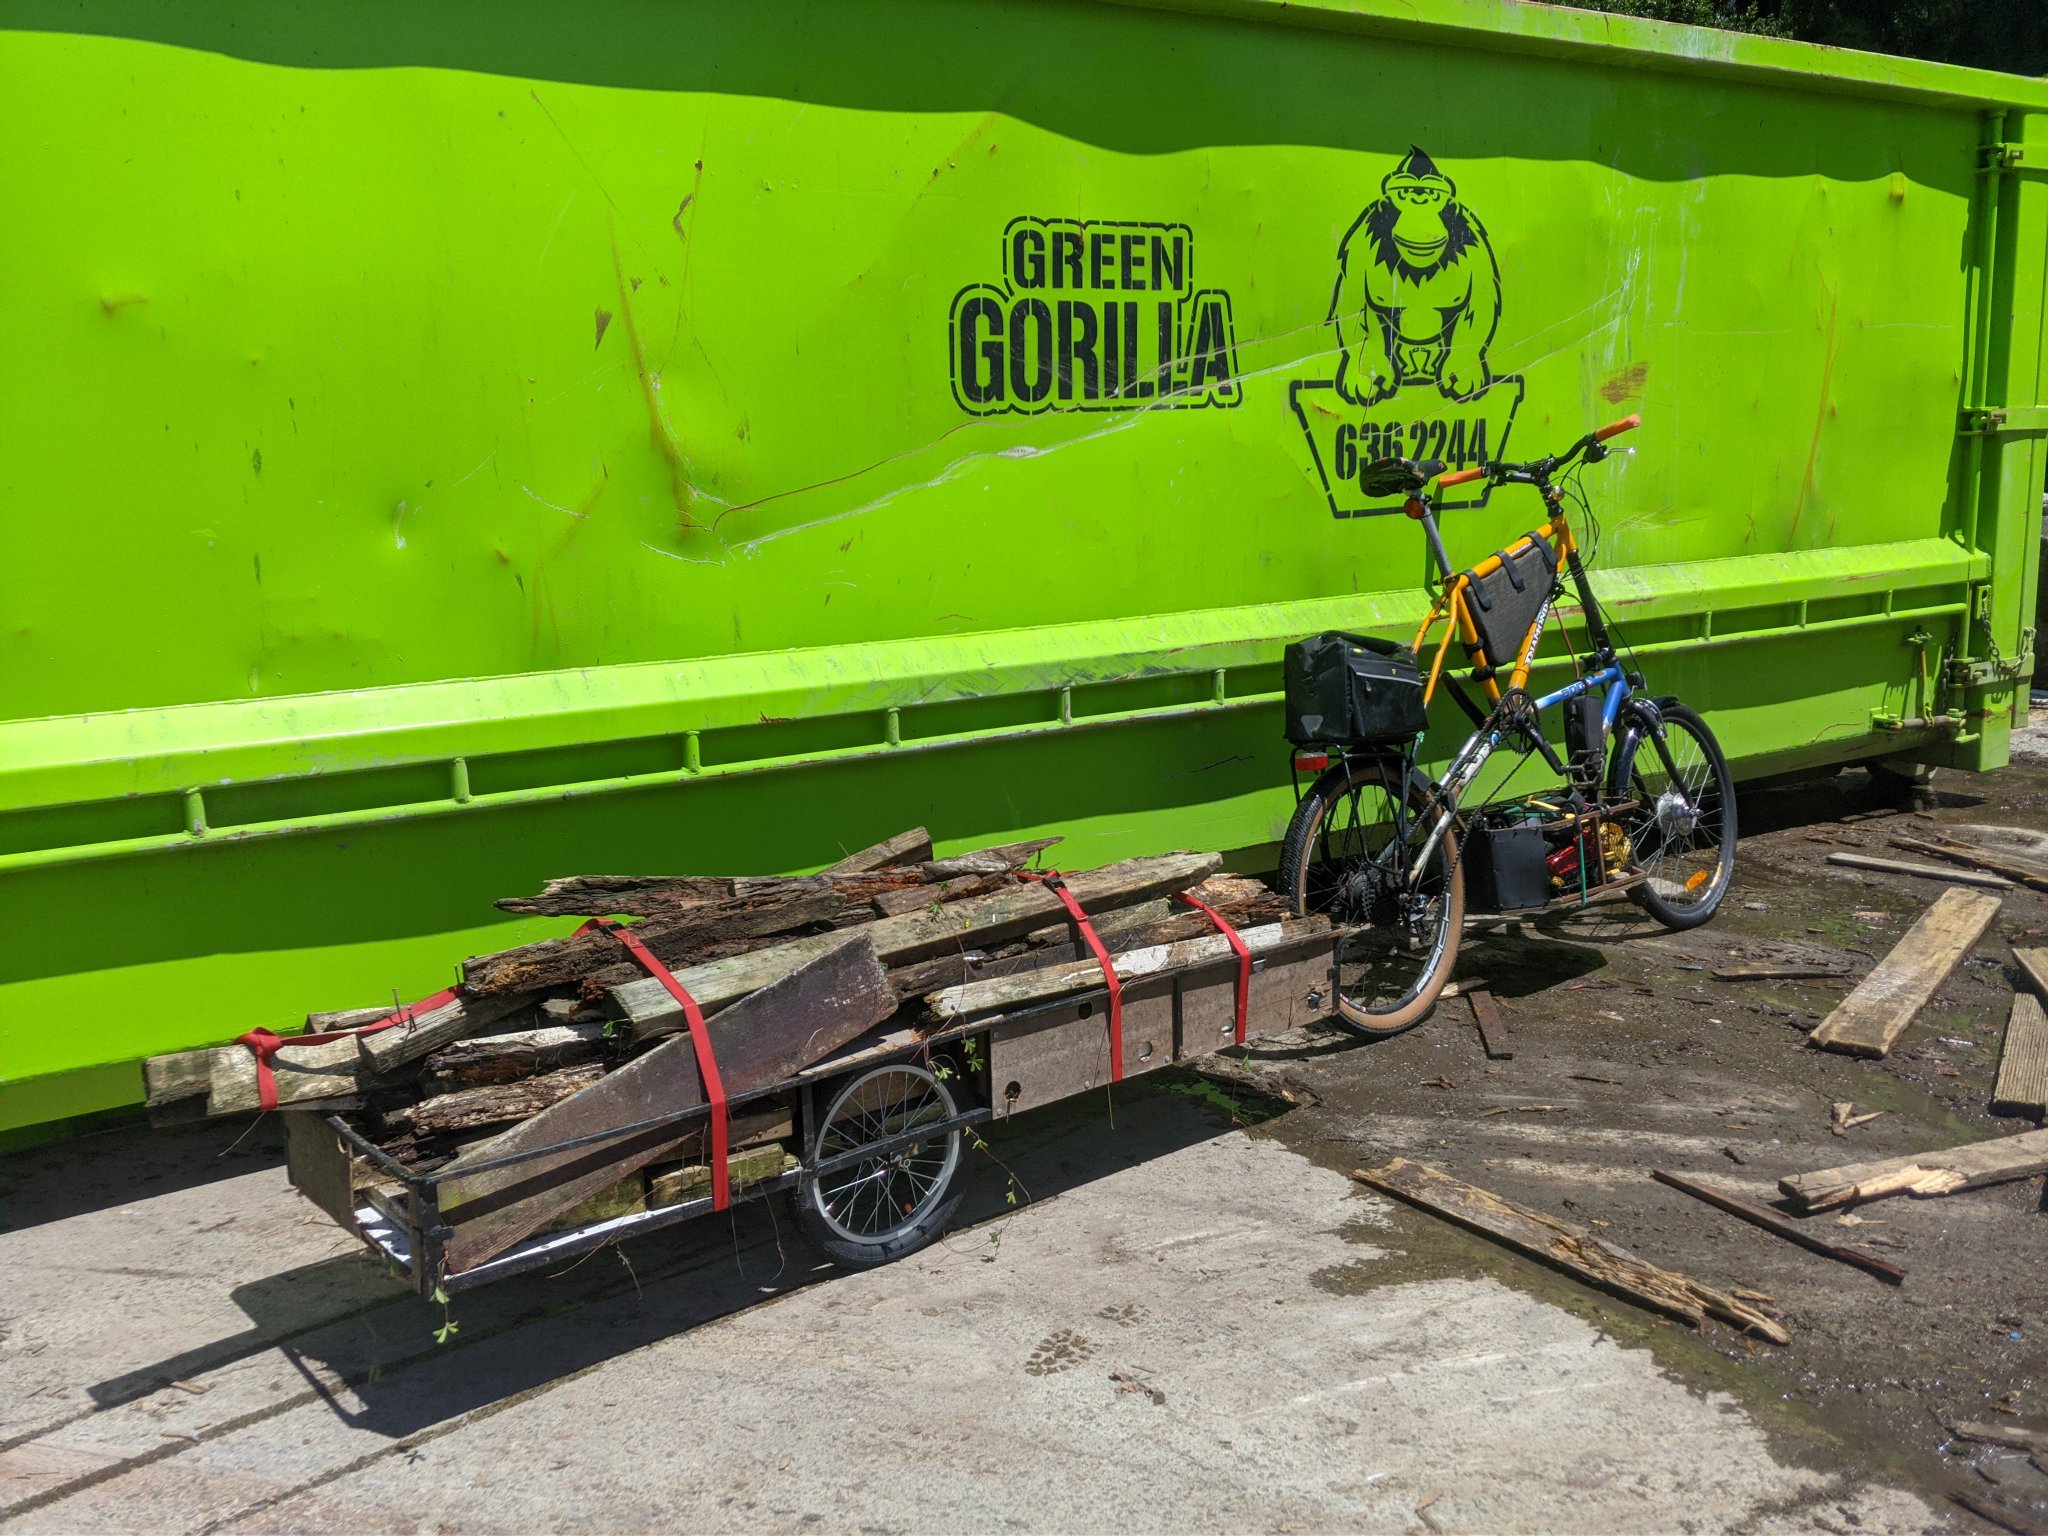 A tall bike with bike trailer posed in front of a large green gorilla waste bin. The bike trailer is loaded with scrap planks of wood.